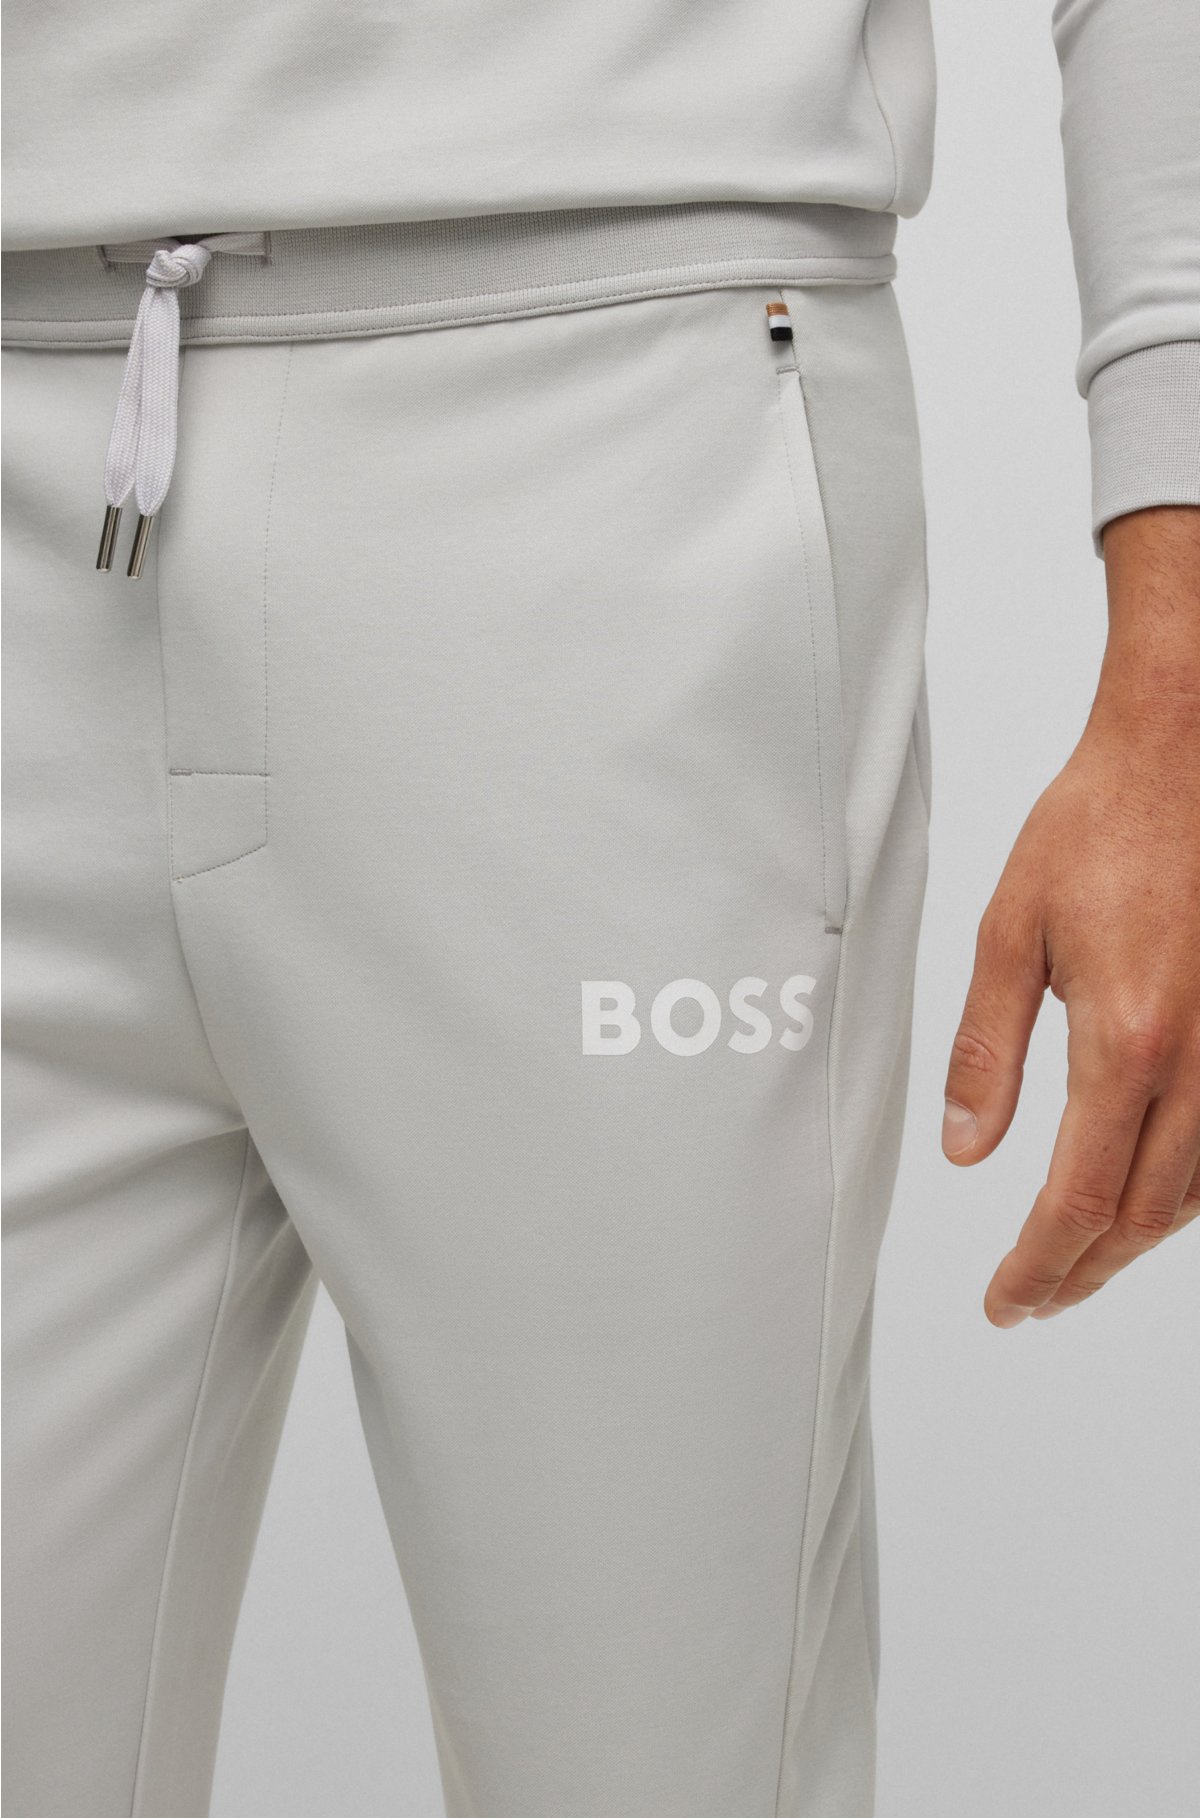 BOSS - Sweatpants with logo embroidered